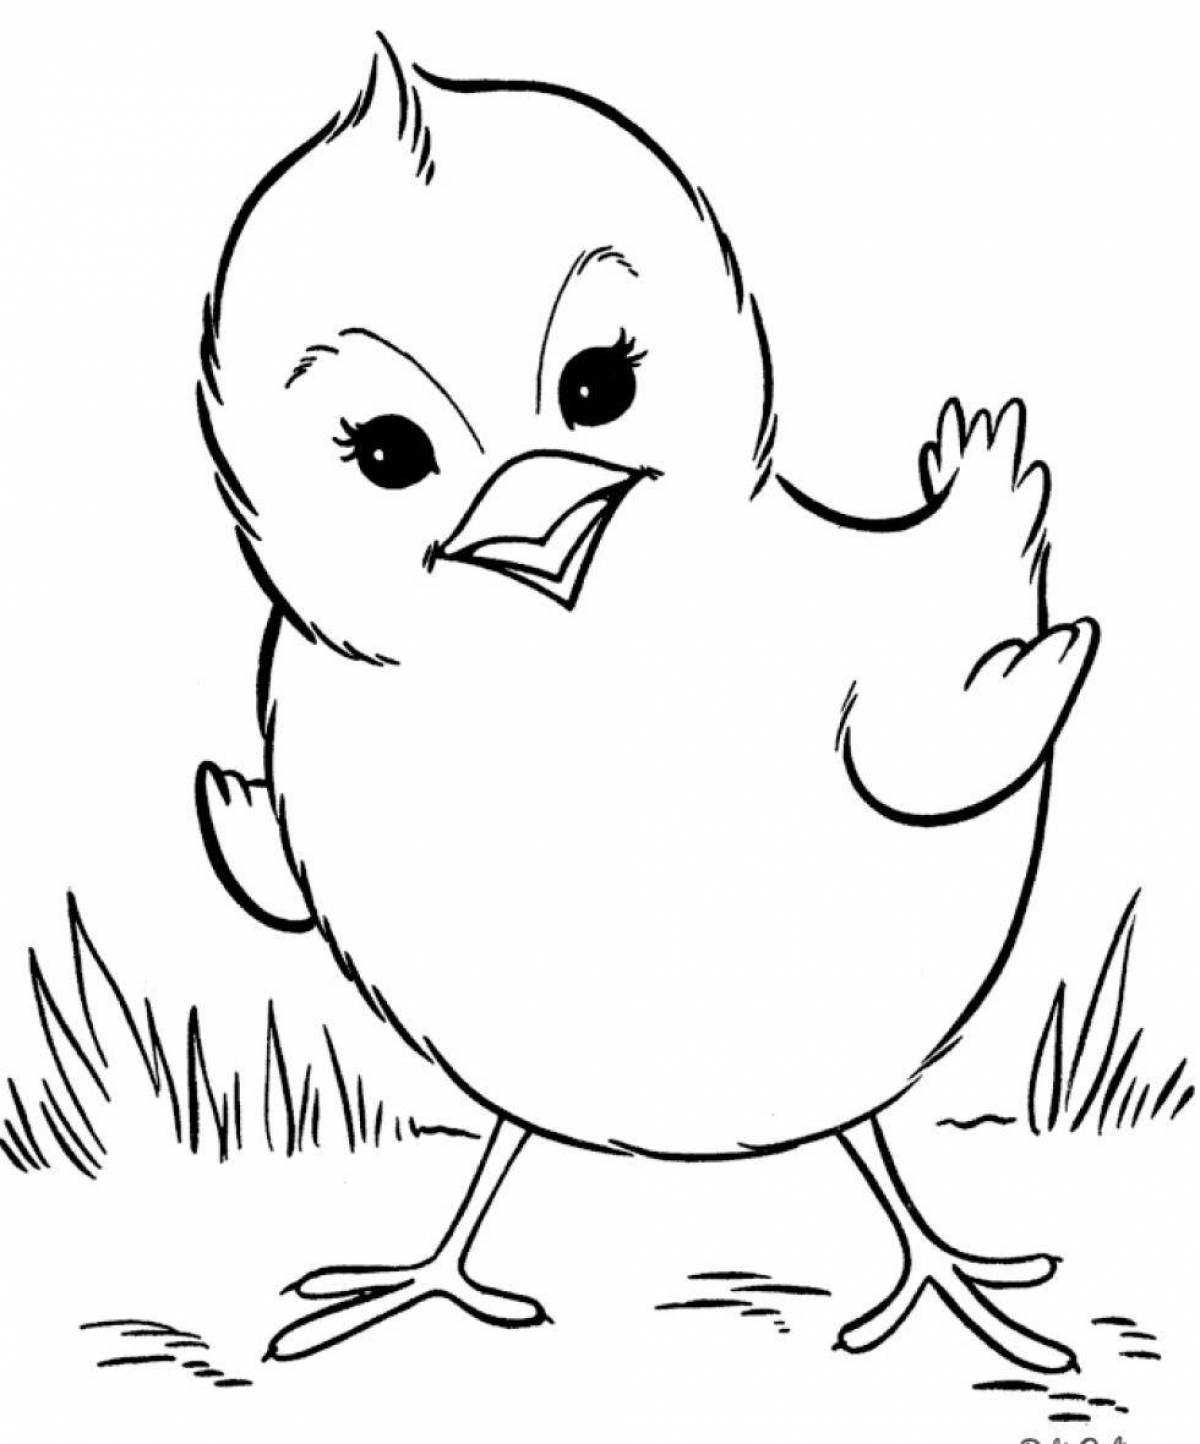 Cute chick coloring book for kids